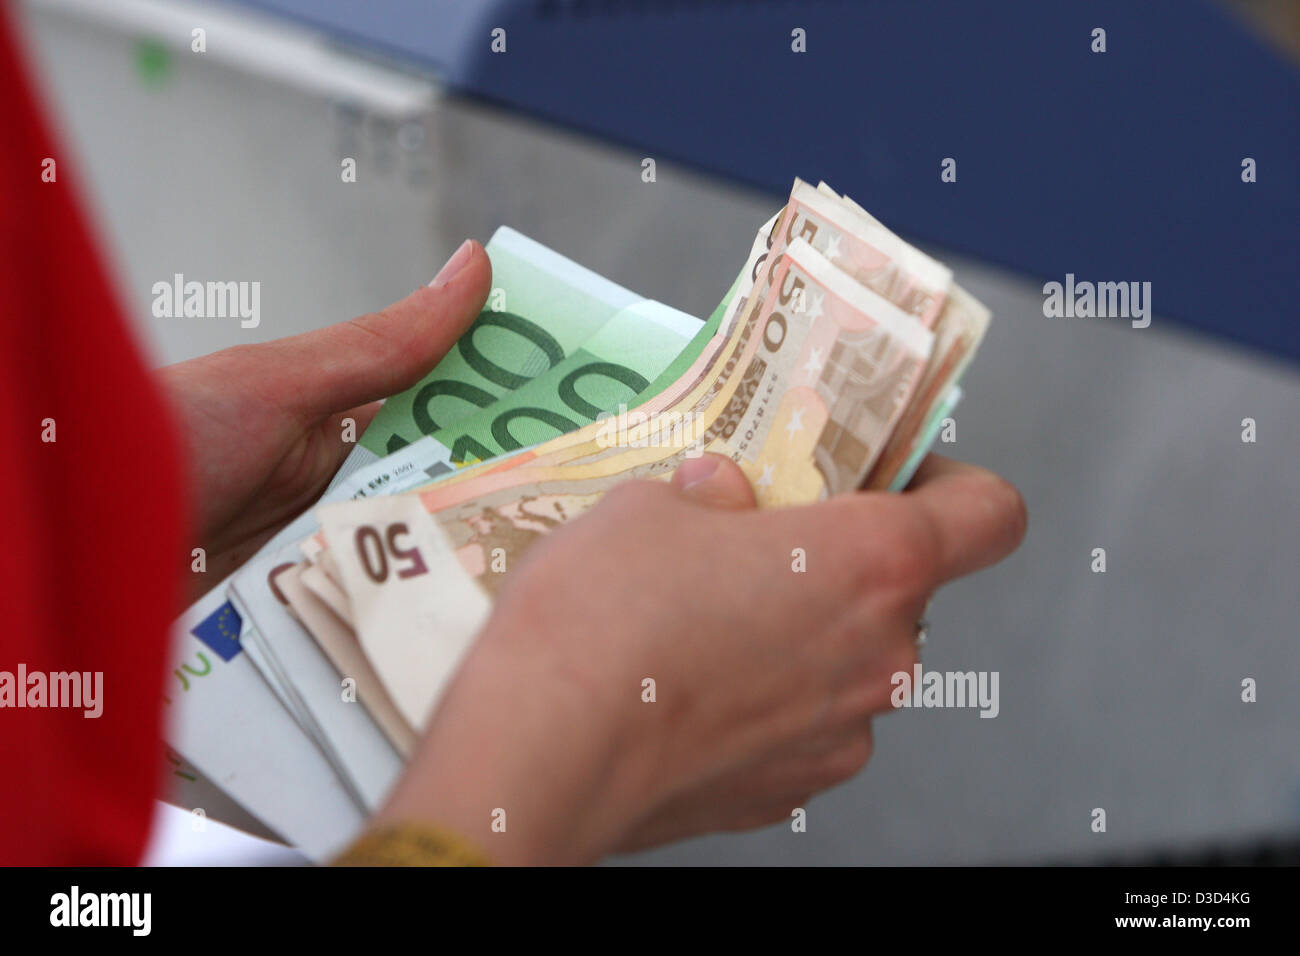 Berlin, Germany, banknotes are counted Stock Photo